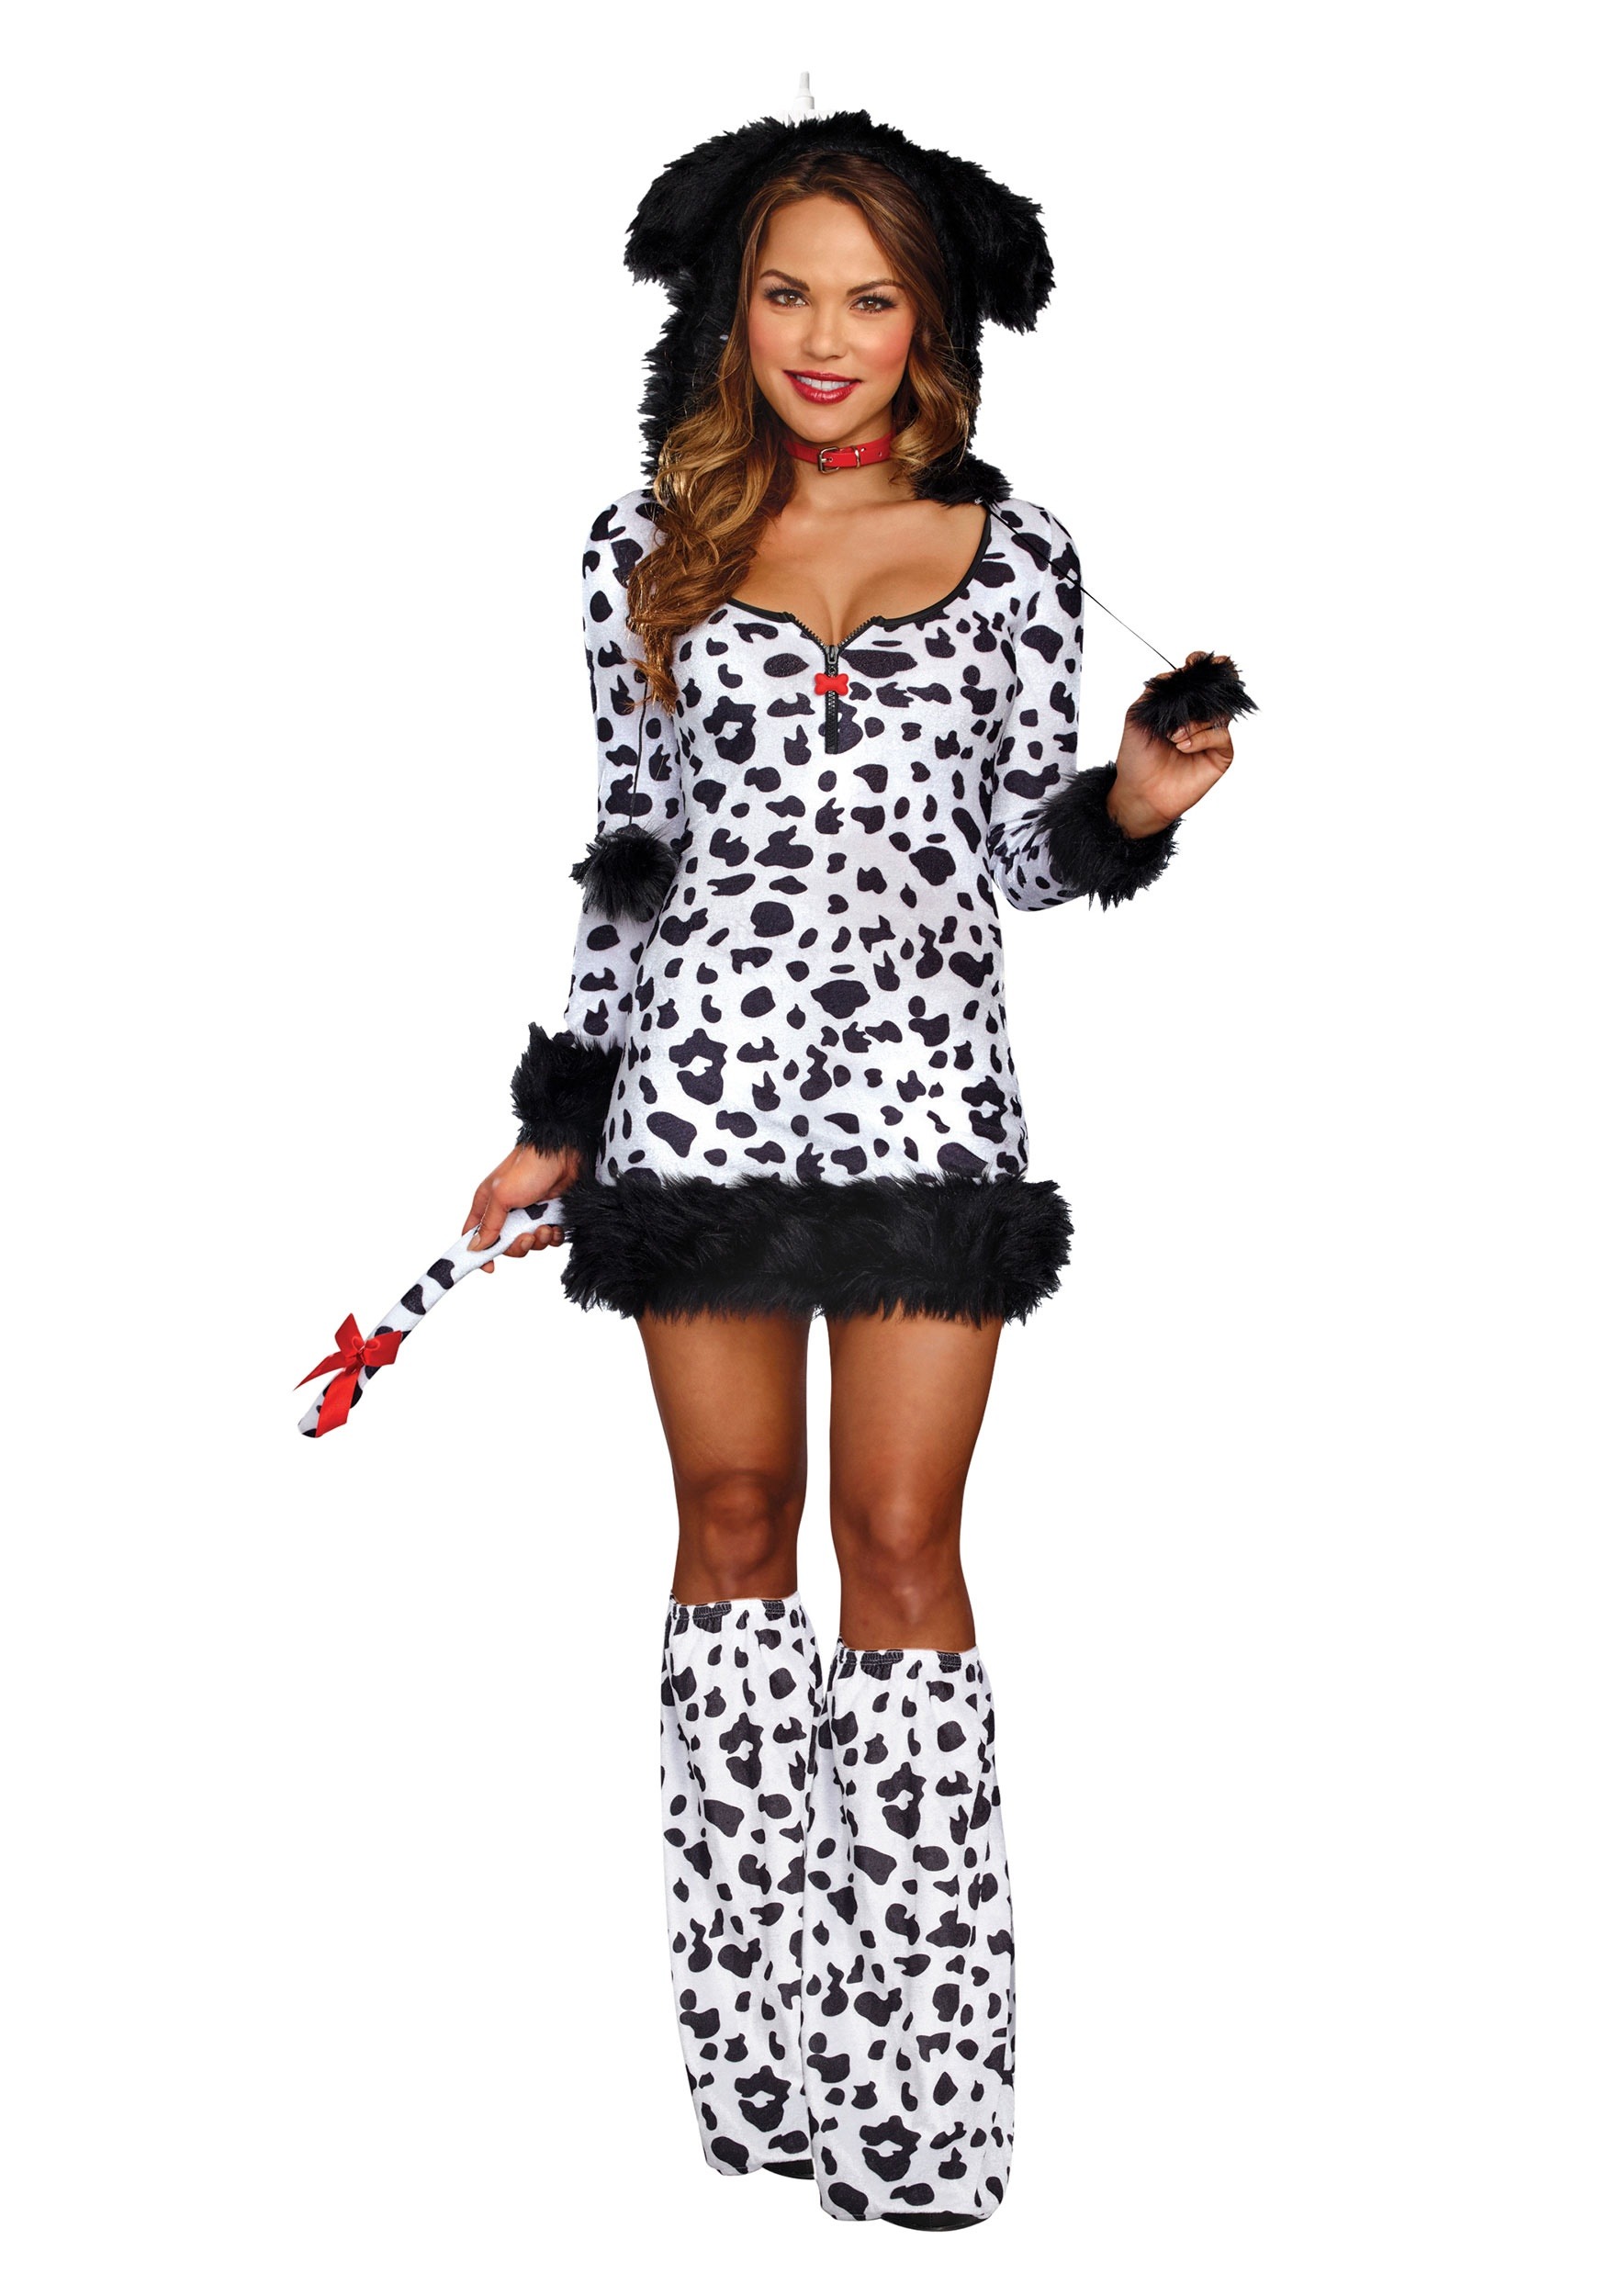 Image of Darling Dalmatian Costume for Women ID DR10624-L